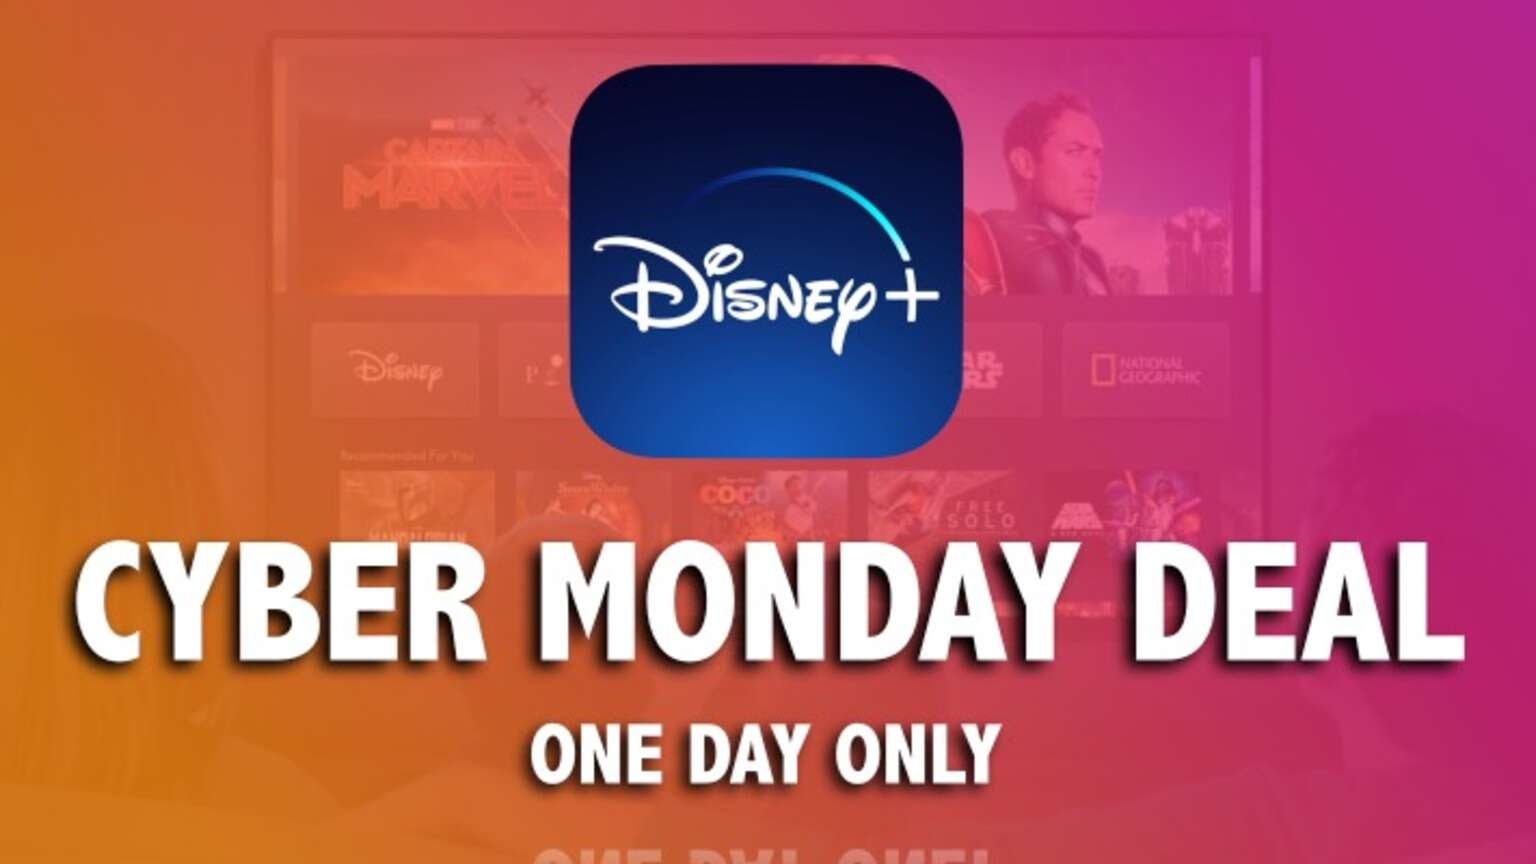 DISNEY+ CYBER MONDAY DEAL Today Only, Get Disney Plus For Just 4.99 a